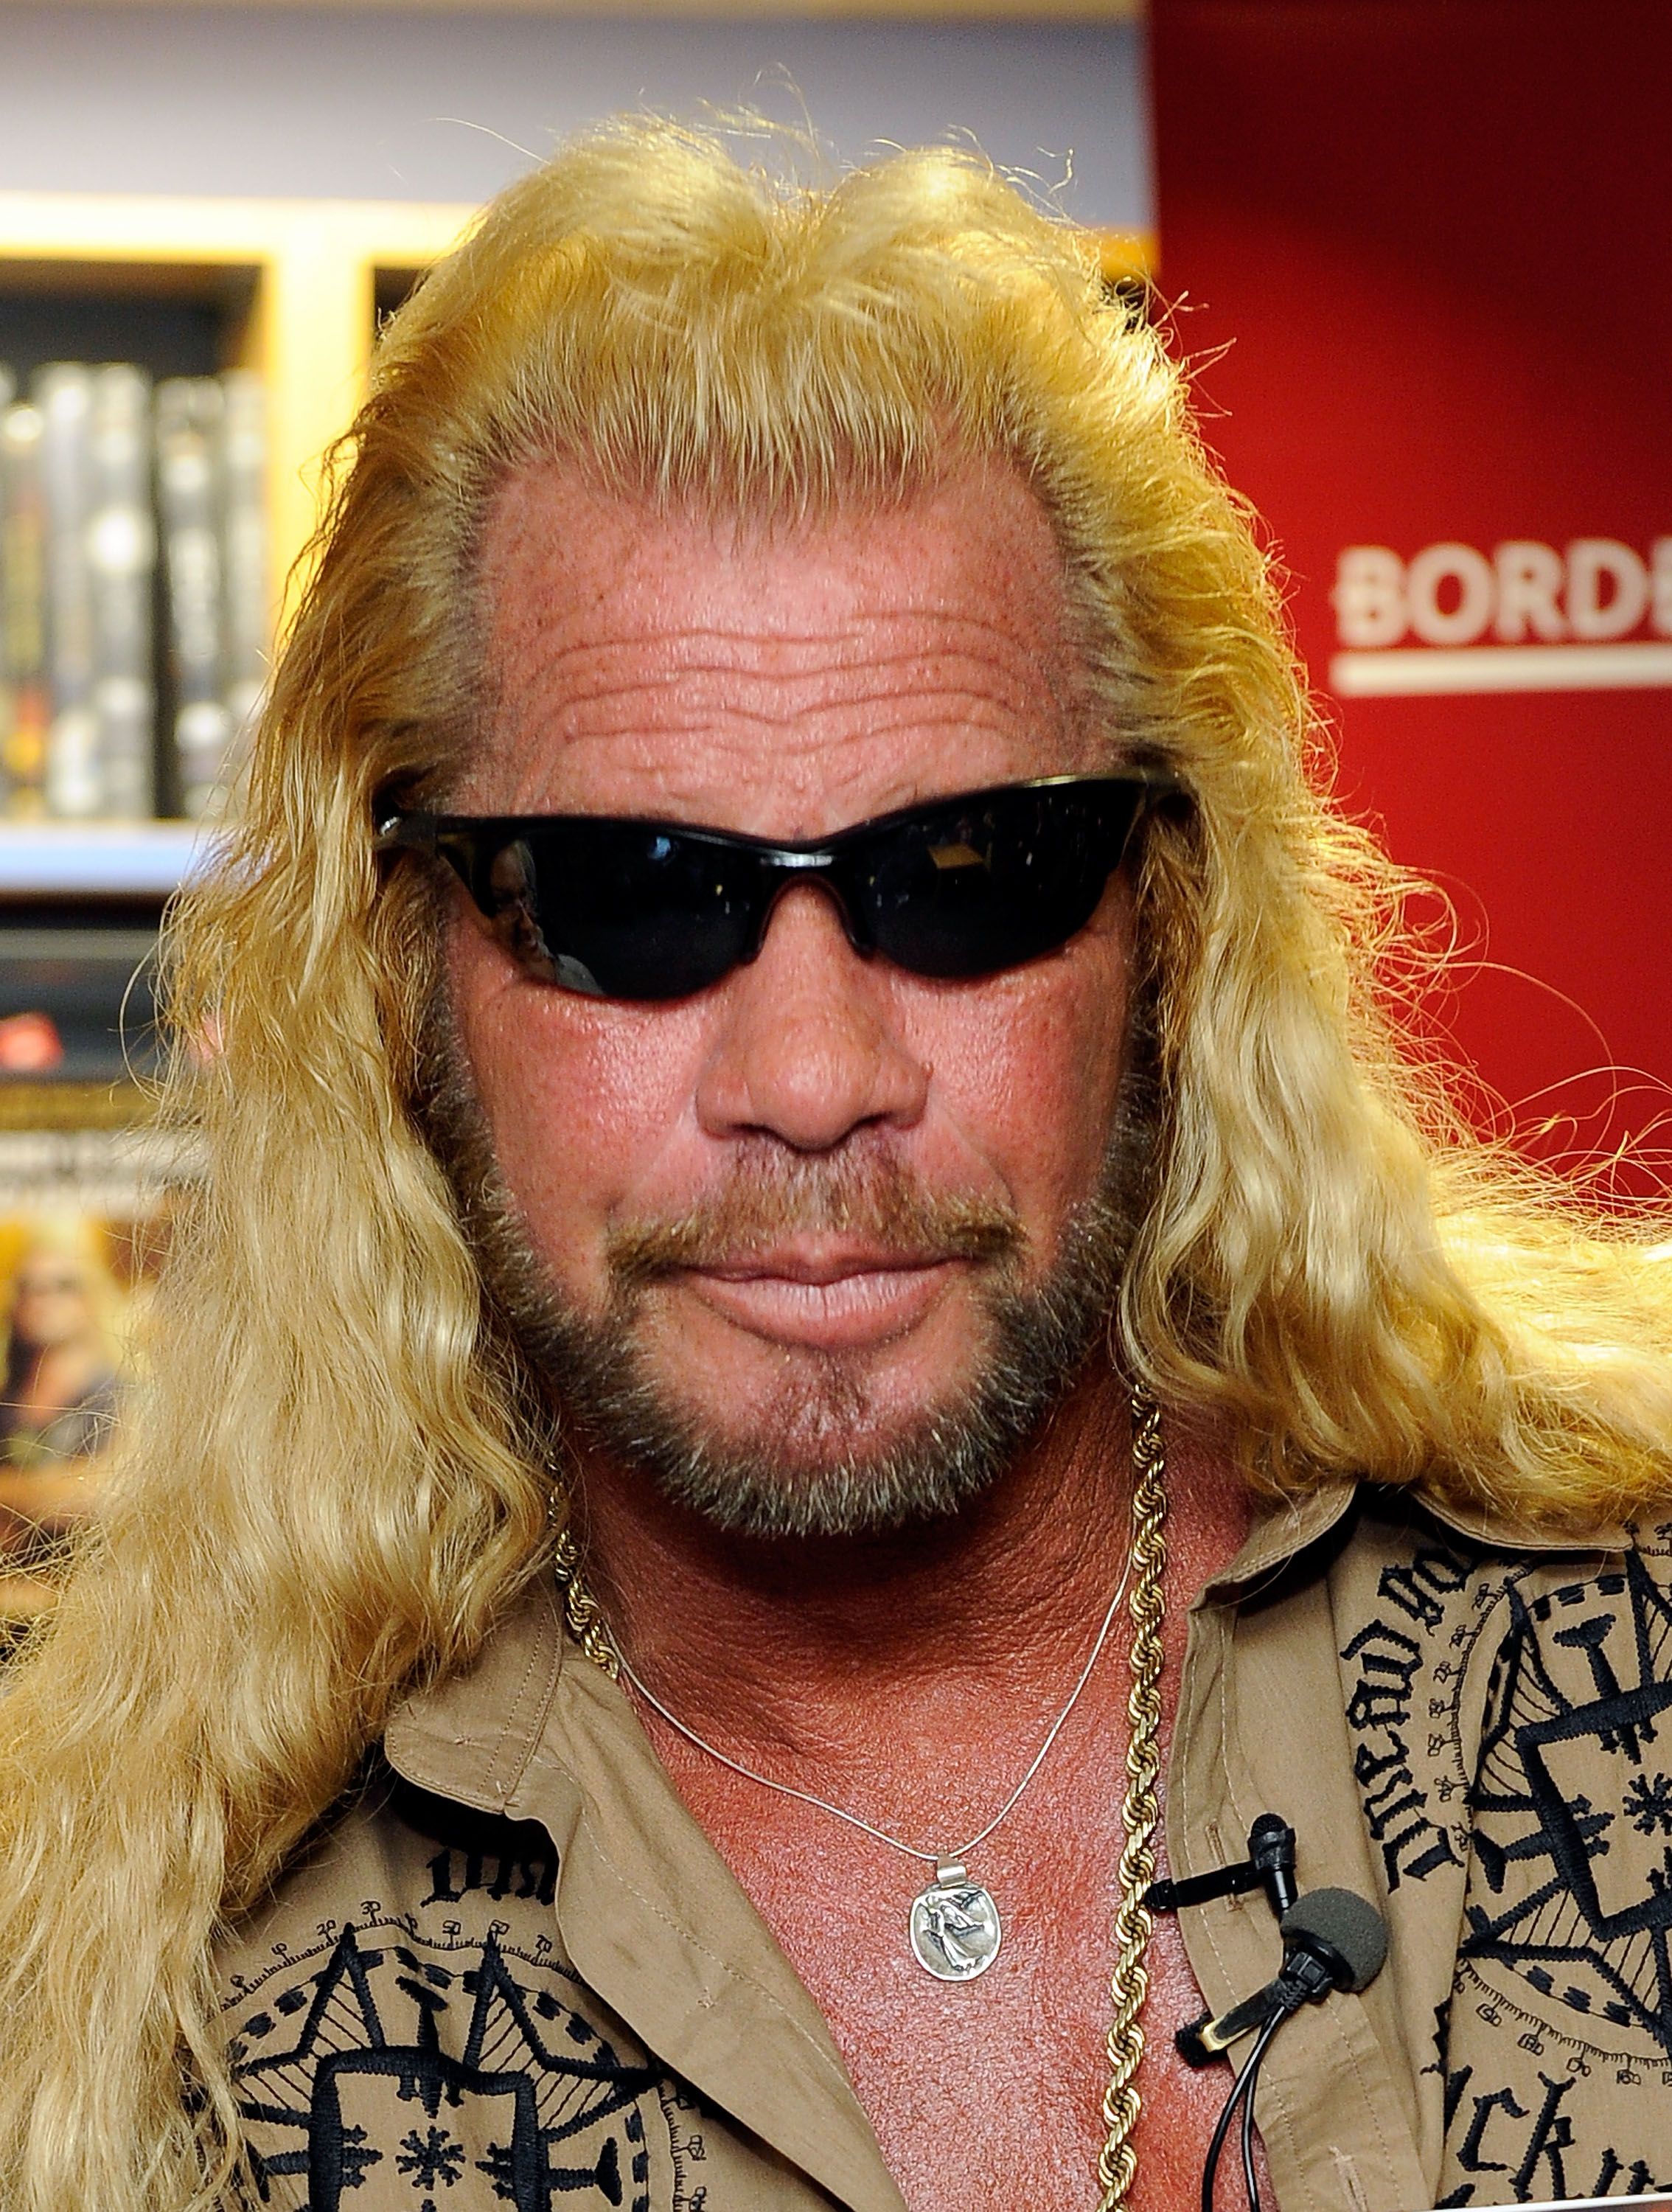 Duane Chapman, known in the media as "Dog the Bounty Hunter" promotes his book "When Mercy Is Shown, Mercy Is Given" at Borders Wall Street on March 19, 2010 in New York City. | Photo: Getty Images